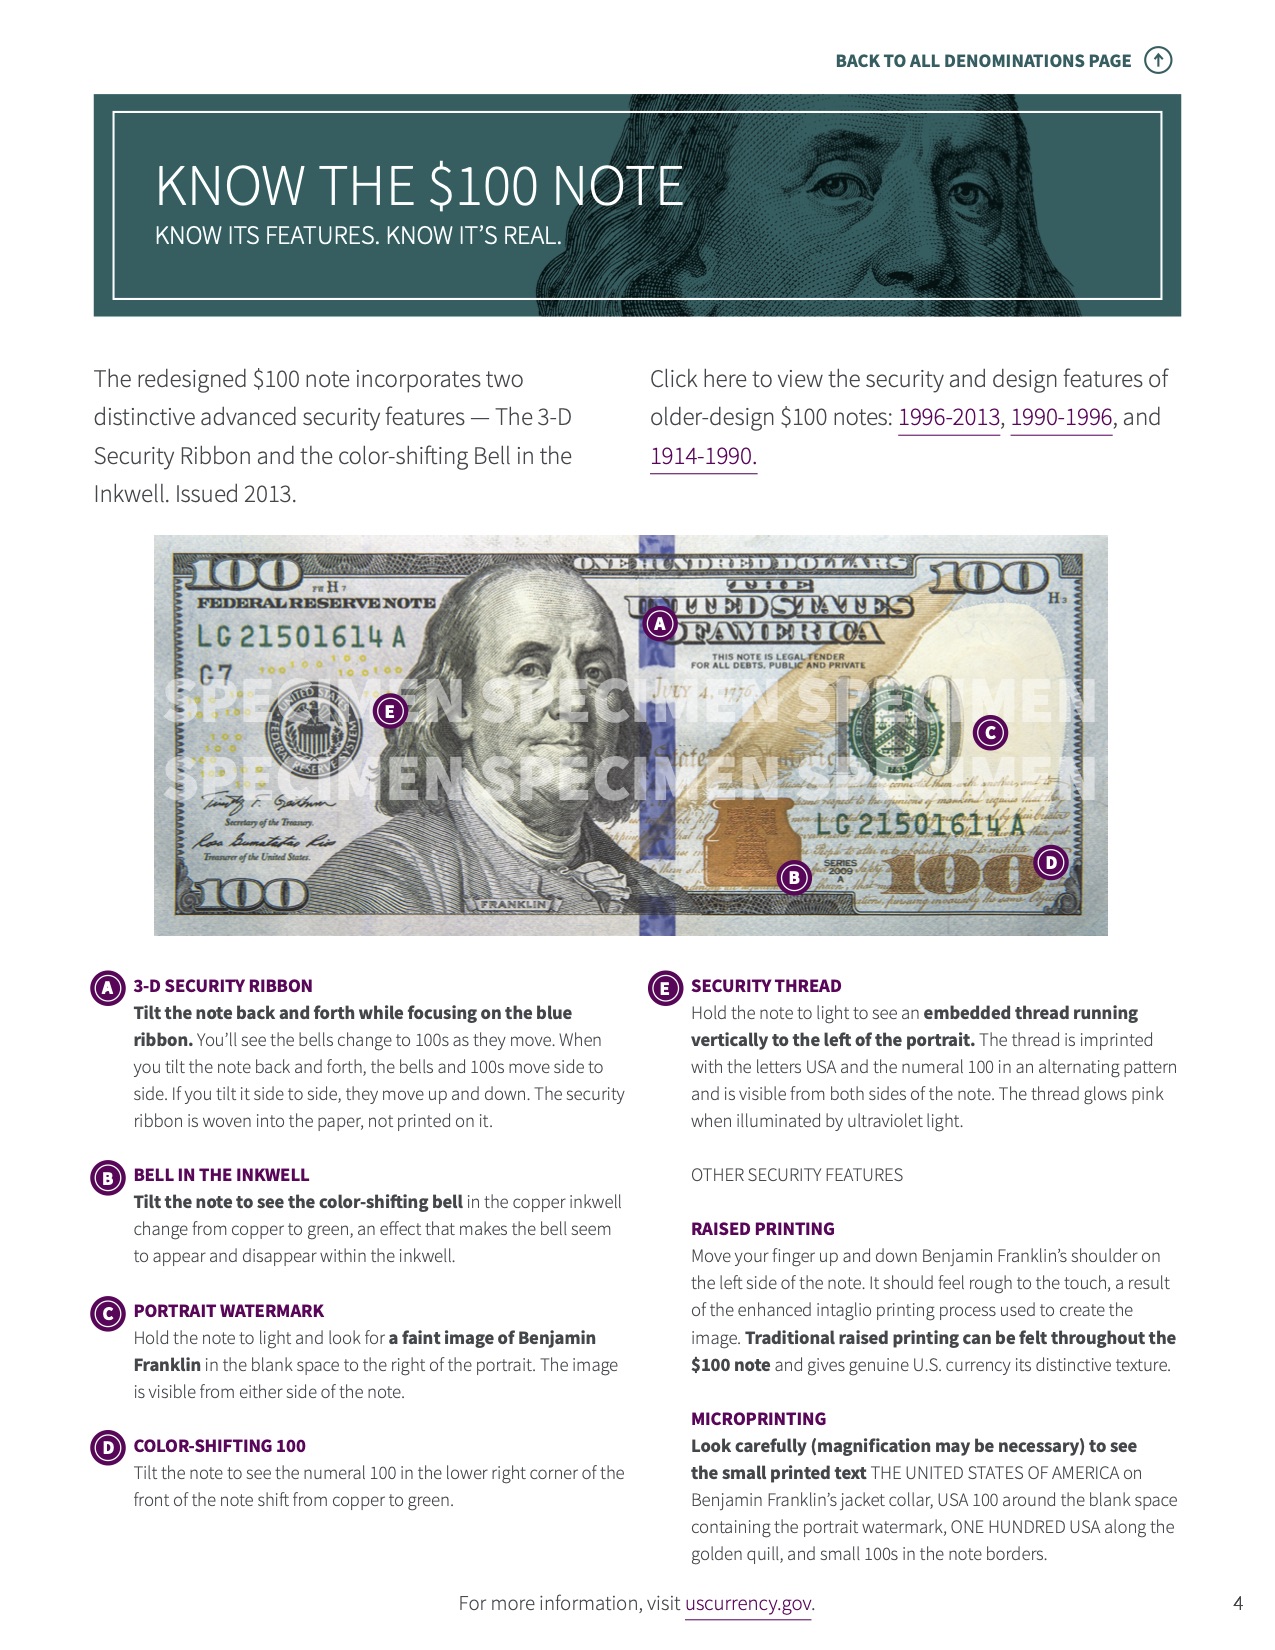 An image of the “Know the $100 Note” page in the Teller Toolkit detailing several security and design features of $100 Federal Reserve notes